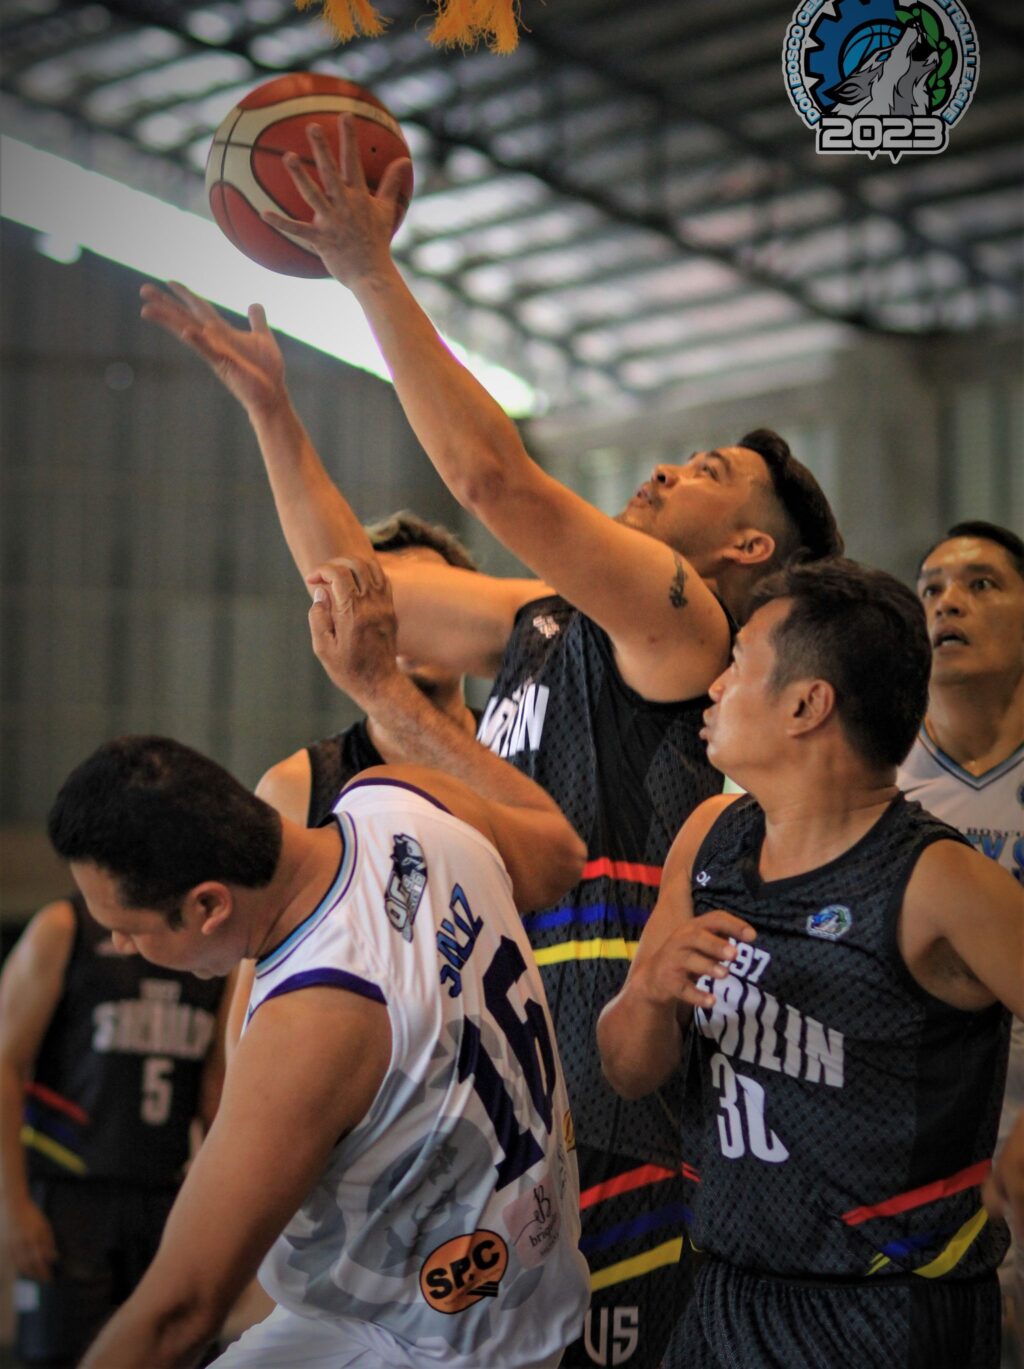 A player from Batch 1997 attempts a difficult layup during their game versus Batch 1996 in the Don Bosco Cebu Alumni Basketball League 2023. | Contributed Photo